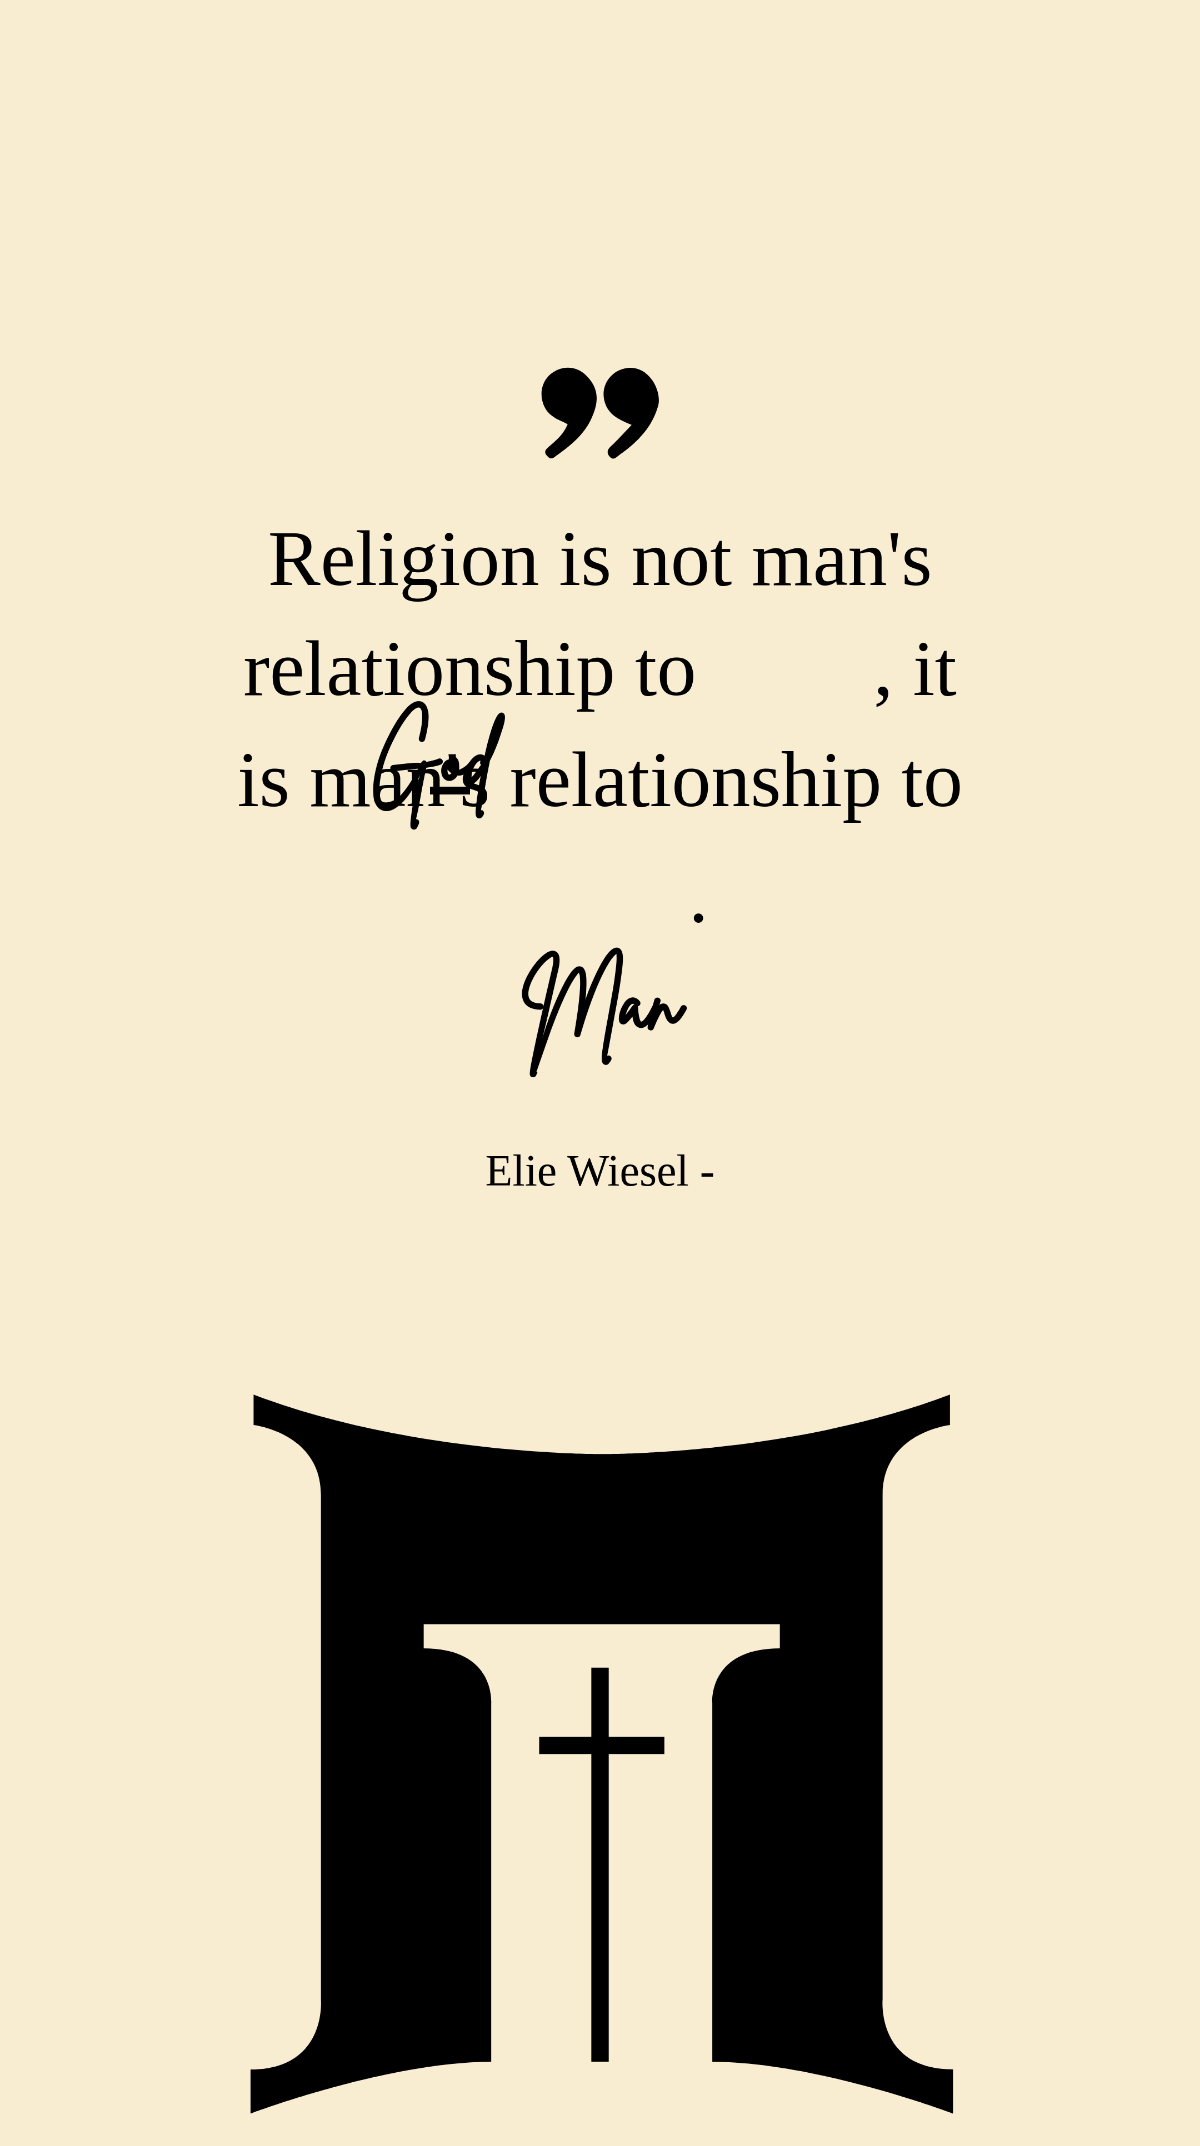 Elie Wiesel - Religion is not man's relationship to God, it is man's relationship to man. Template